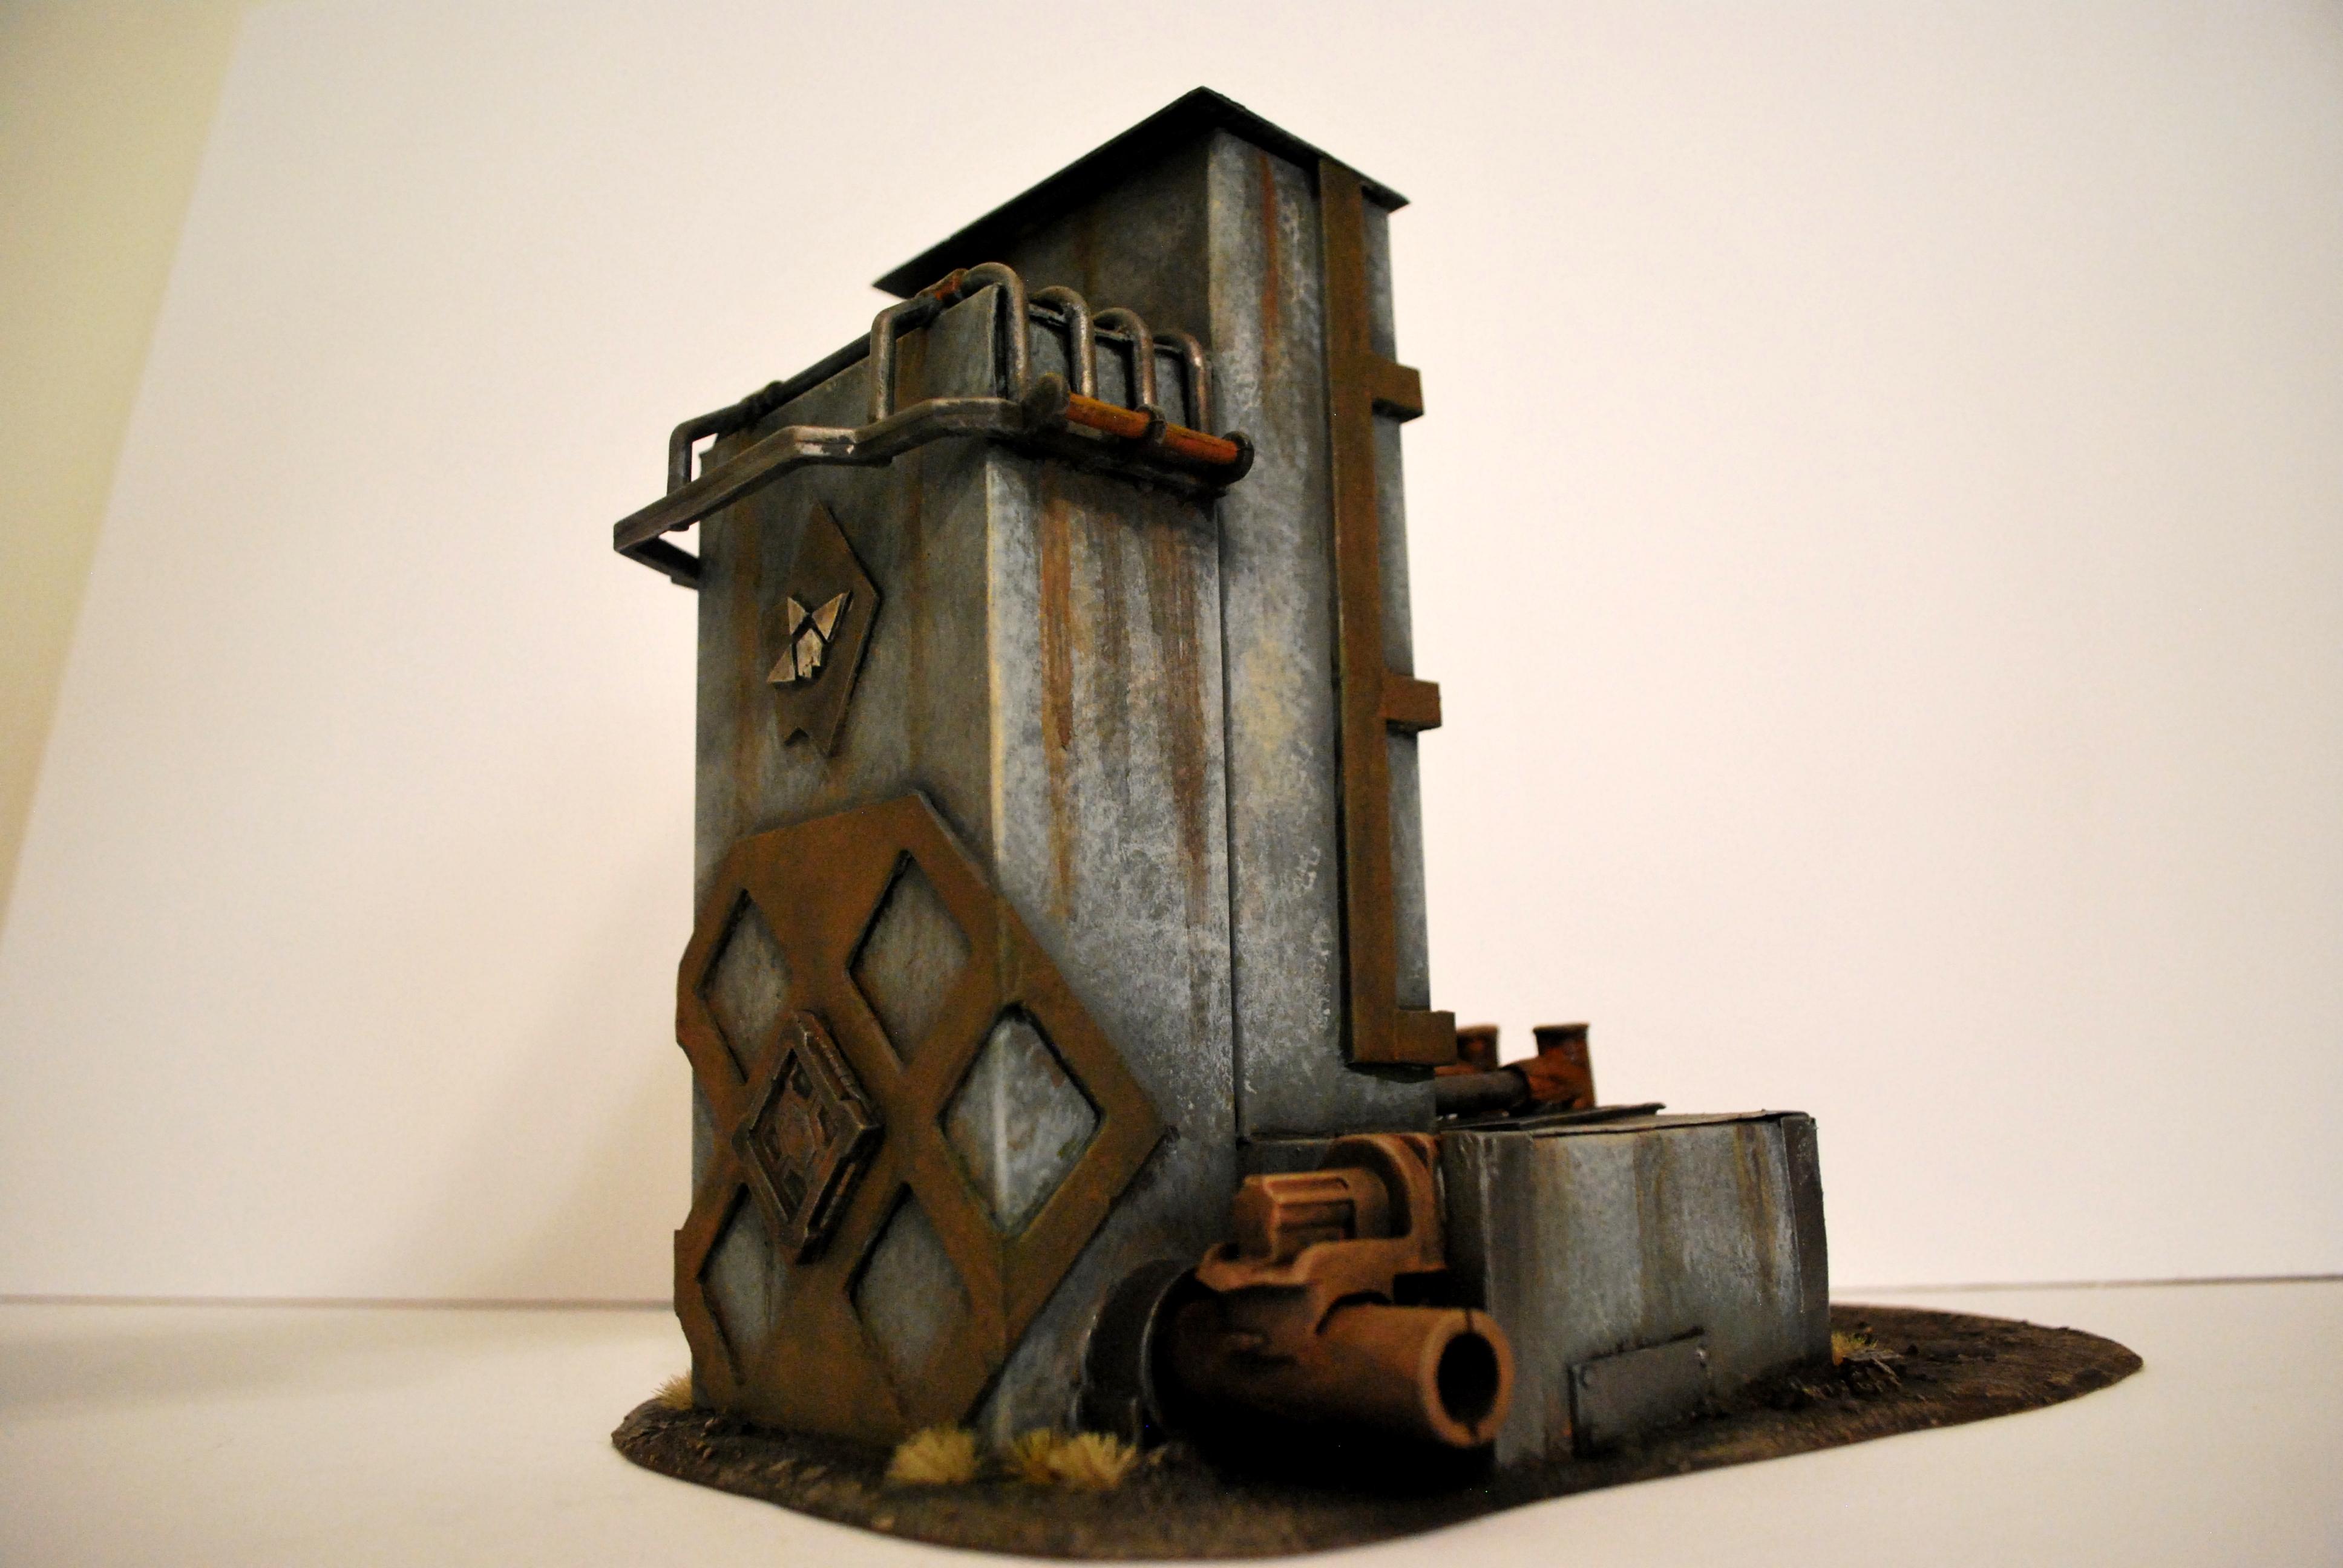 Buildings, Commission, Fallout, Industrial, Post Apoc, Ruins, Scratch Build, Terrain, This Is Not A Test